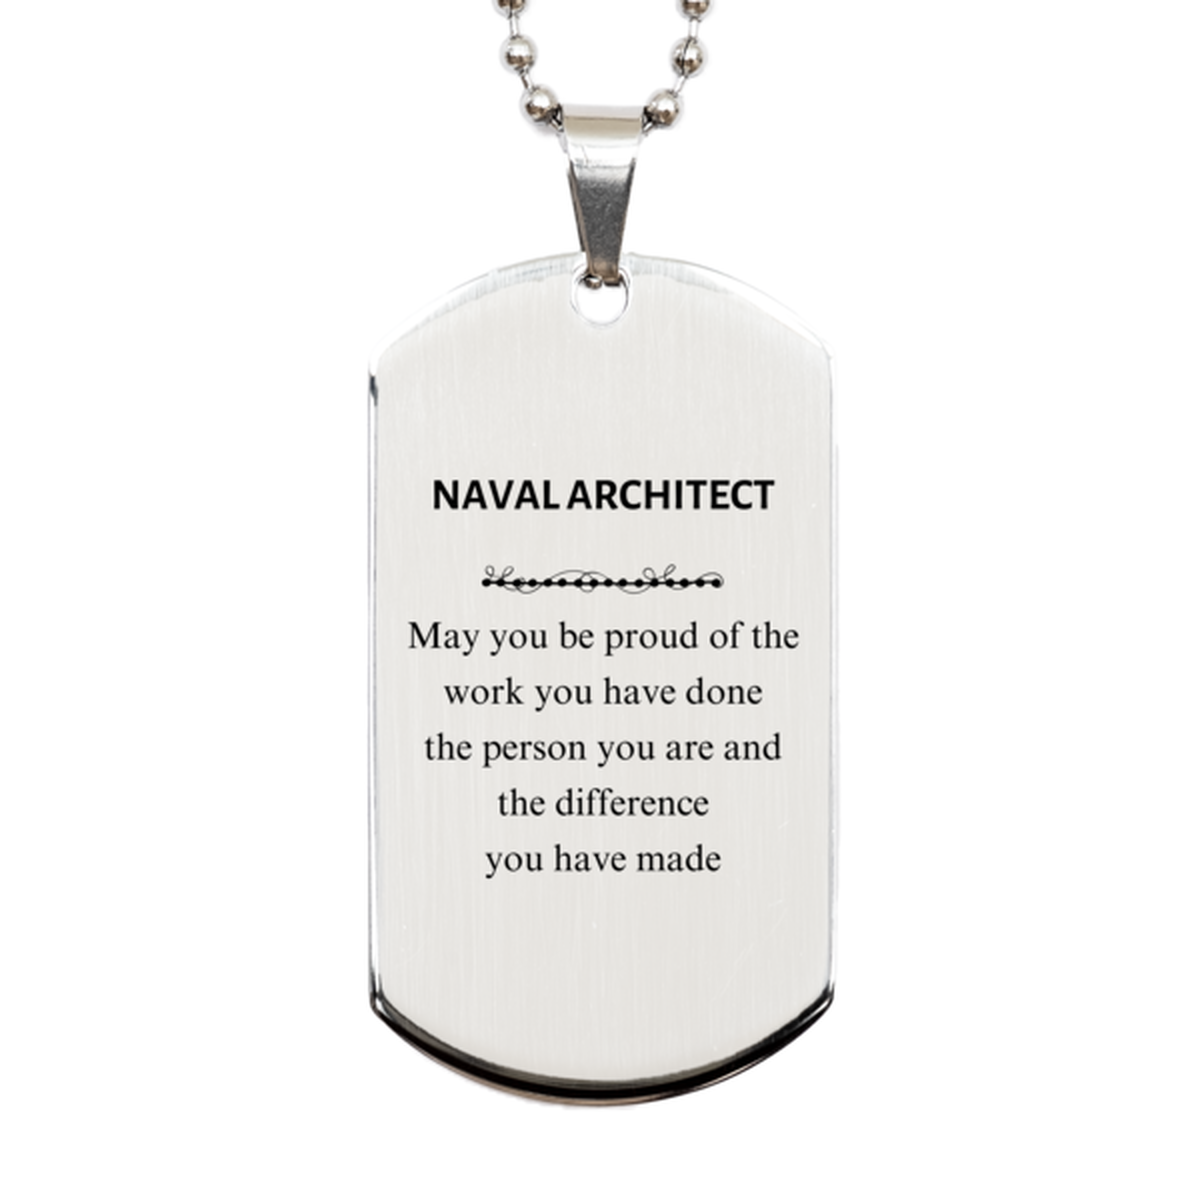 Naval Architect May you be proud of the work you have done, Retirement Naval Architect Silver Dog Tag for Colleague Appreciation Gifts Amazing for Naval Architect